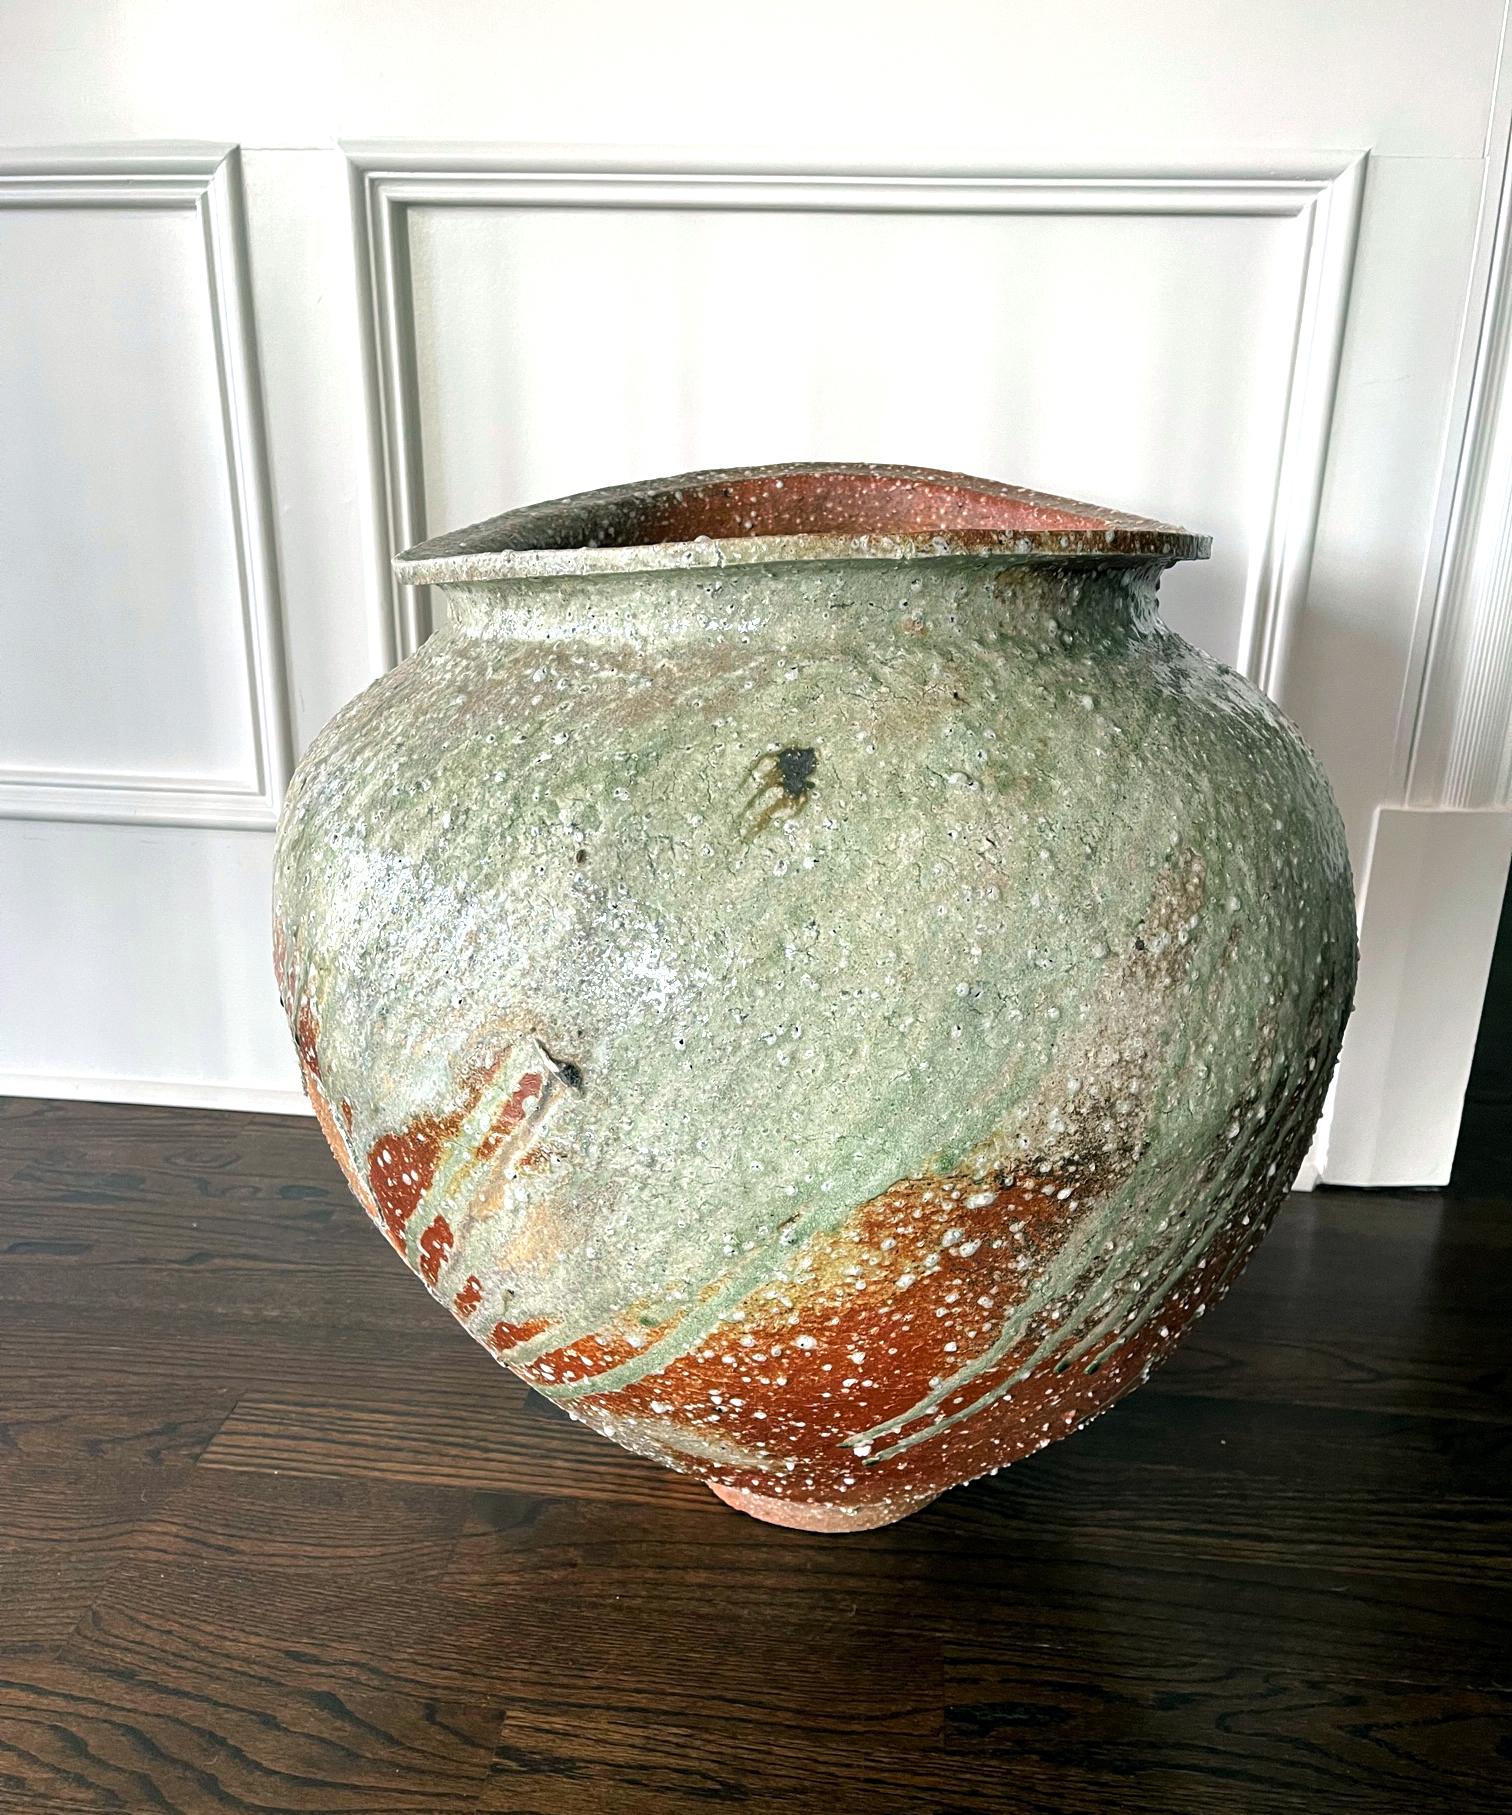 A massive stoneware tsubo floor jar created by Japanese contemporary ceramic artist Kai Tsujimura (1976-). The heavy jar with its impressive volume was made in the tradition of Iga ware with local coarse sandy clay that turned reddish after the